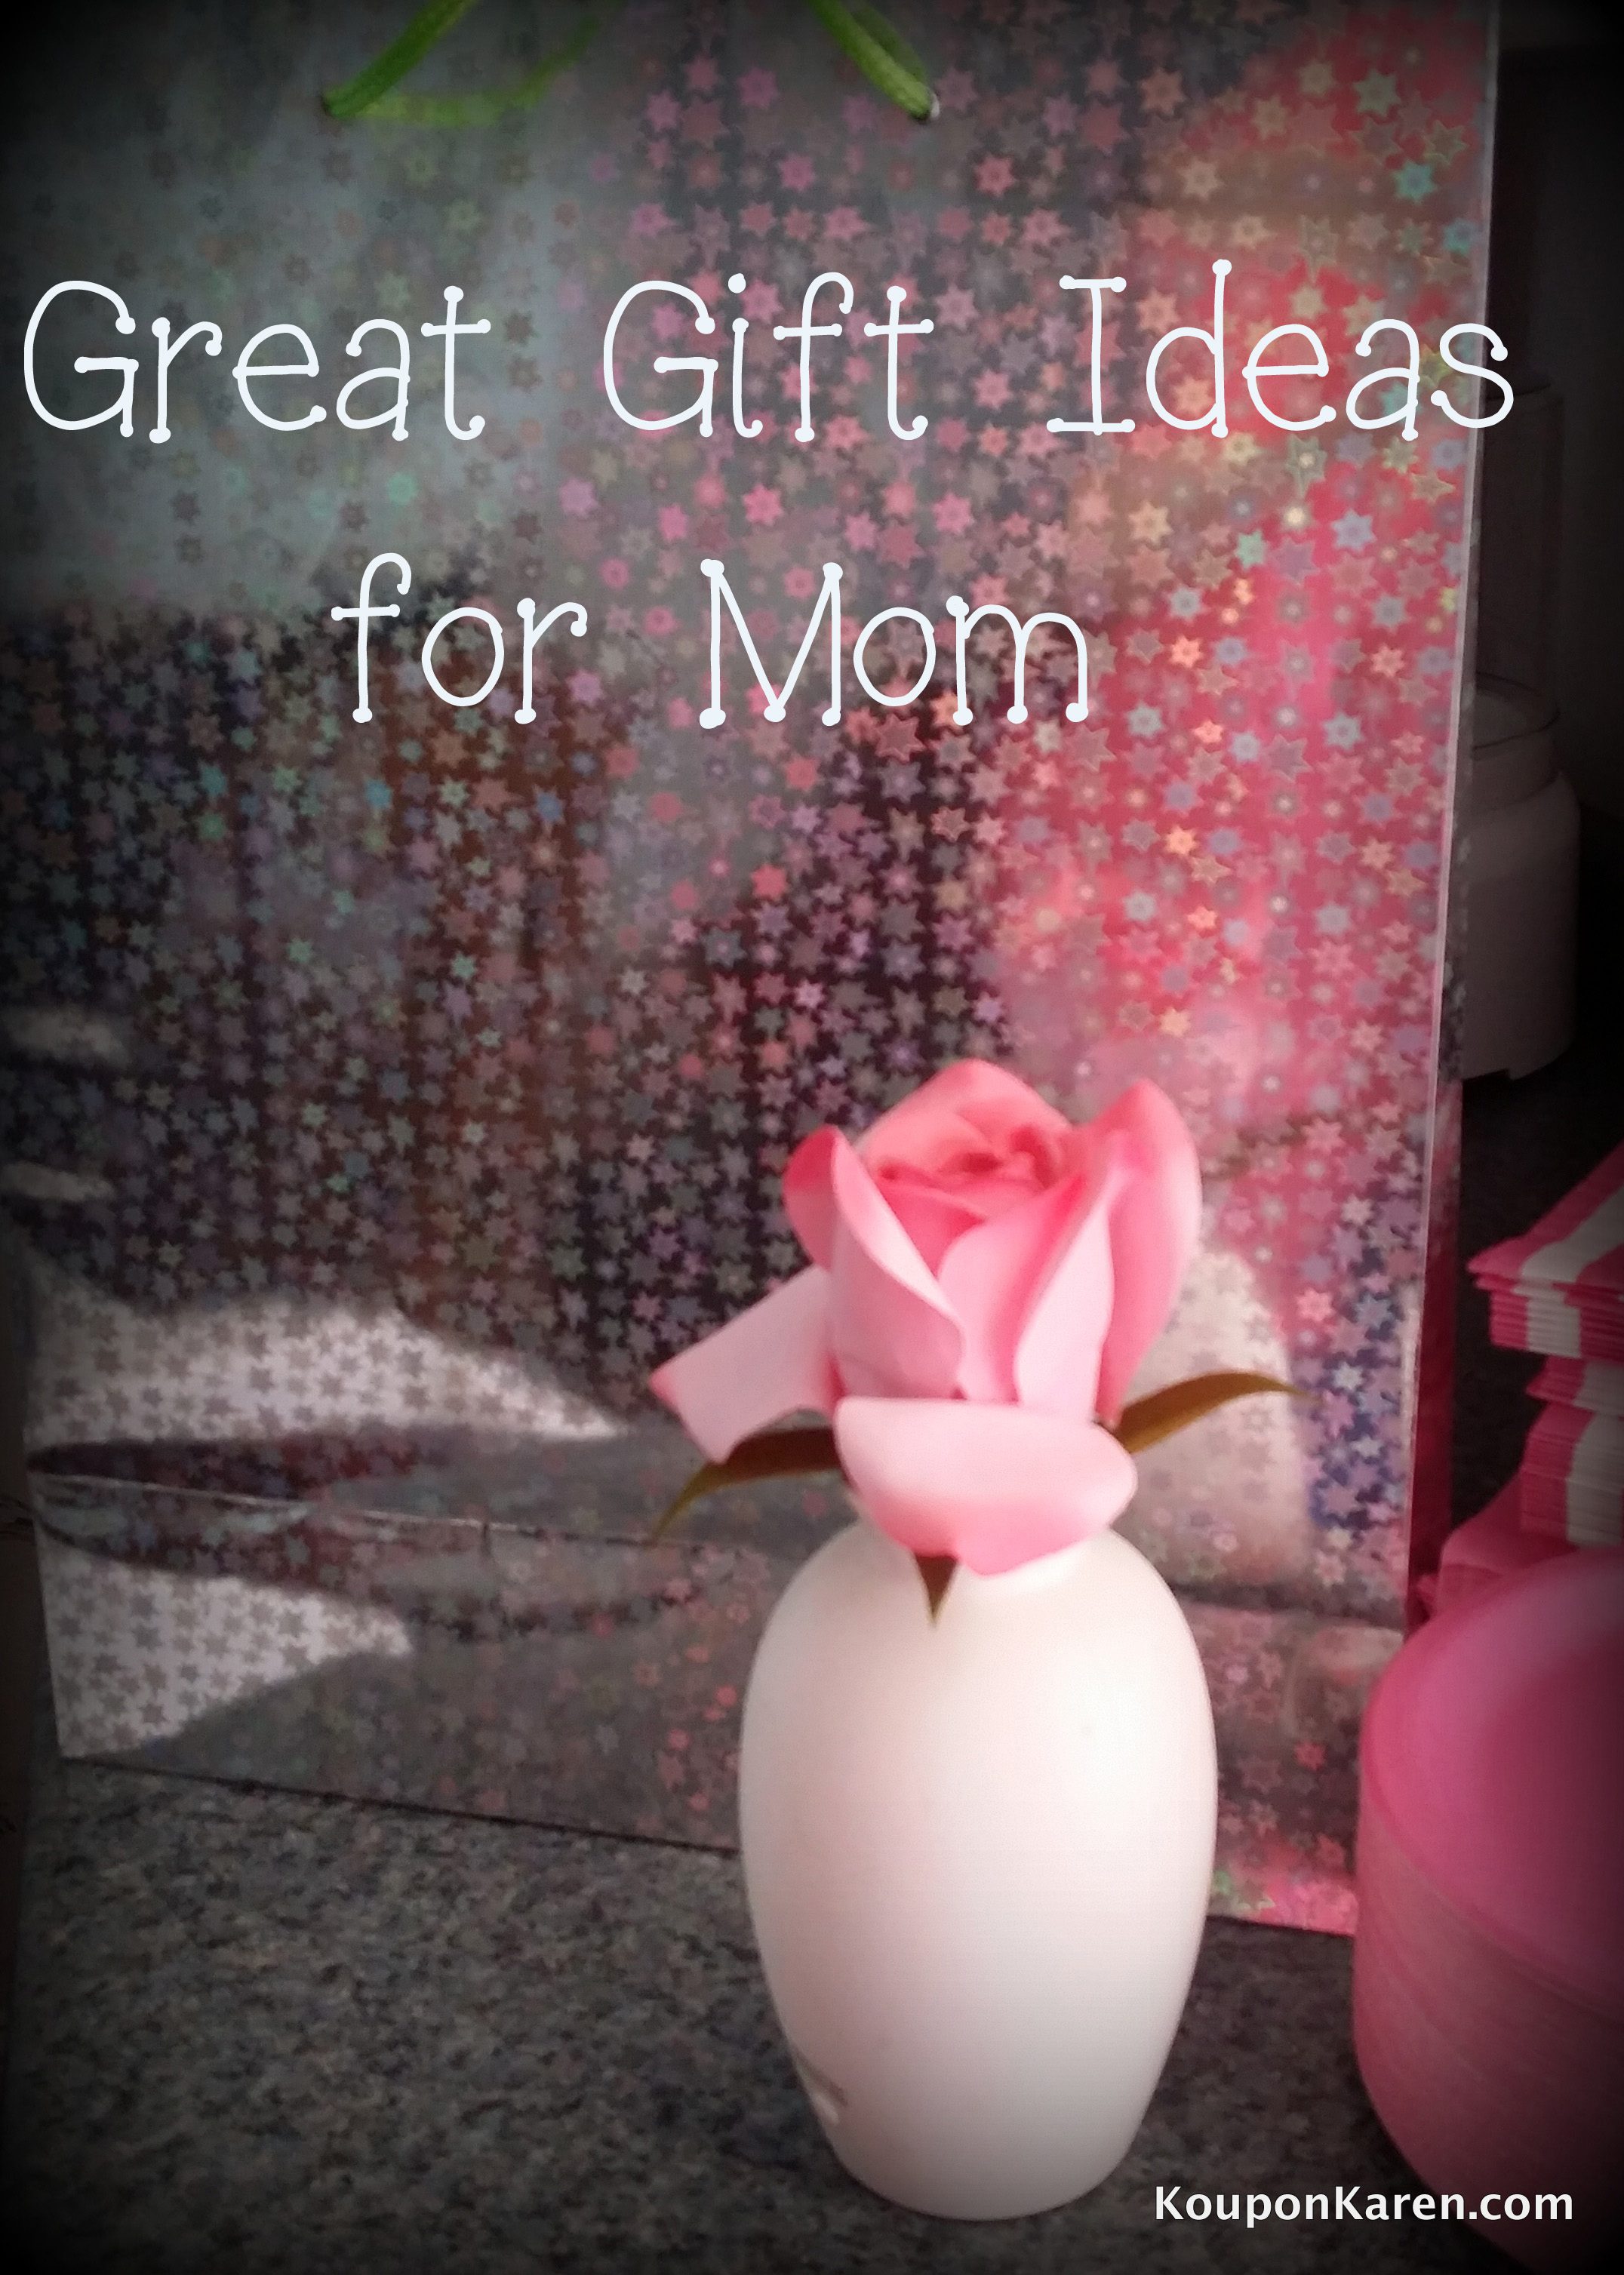 Gift ideas for Mom on Mother’s Day